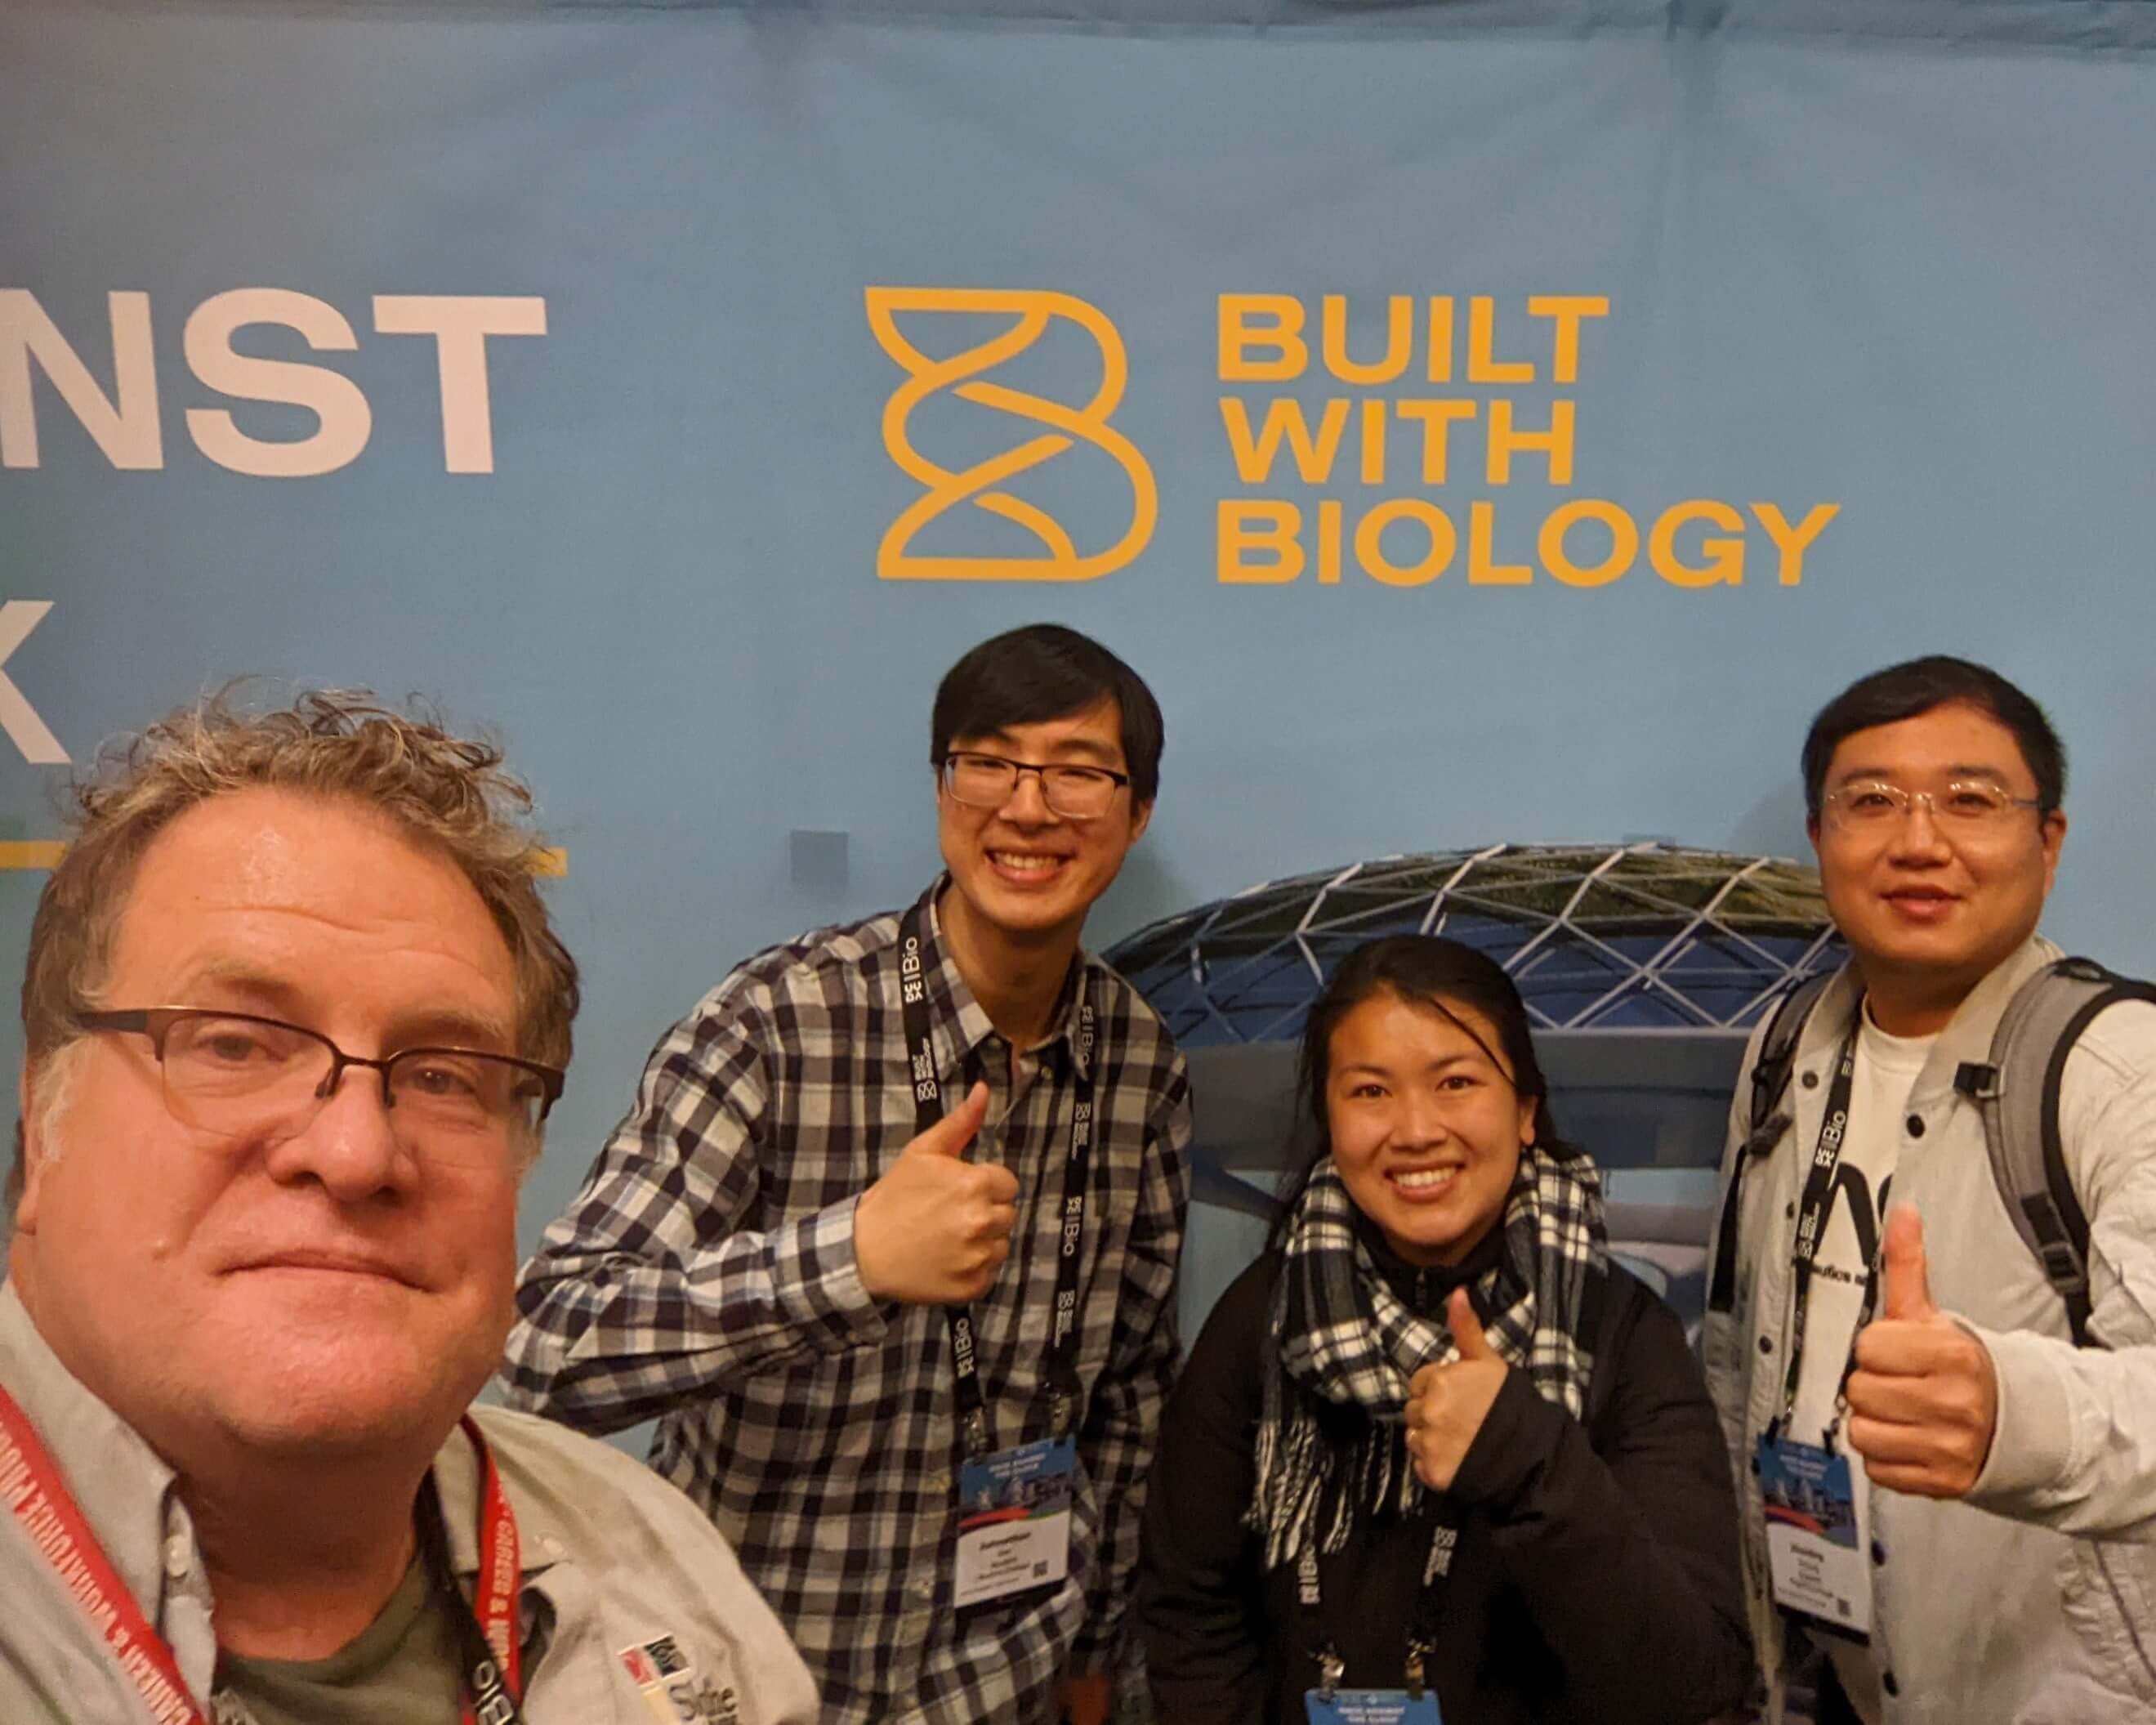 Faculty give thumbs up and stand in front of a backdrop reading 'Built with Biology'